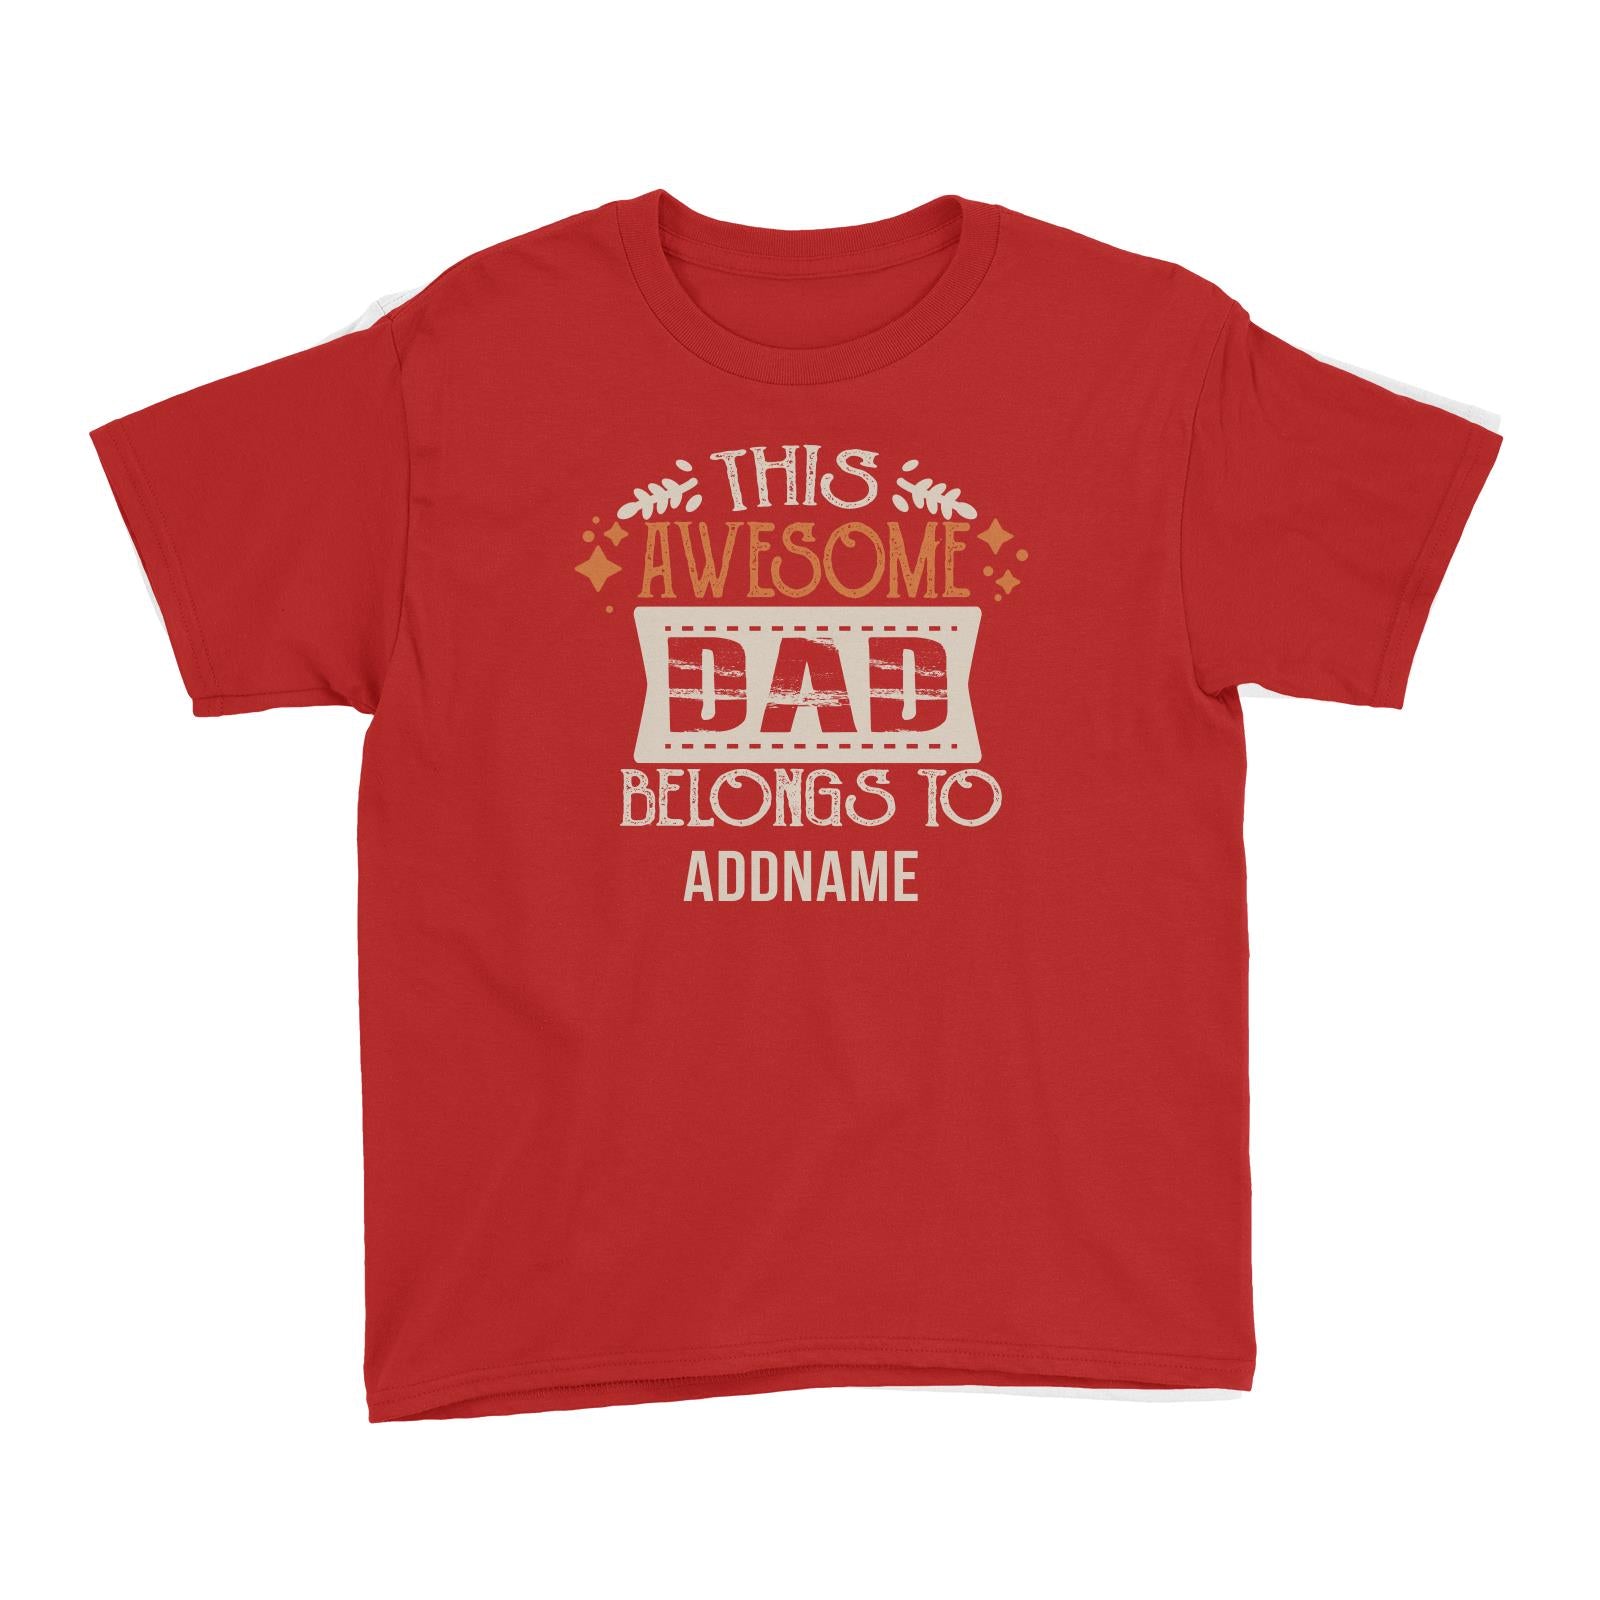 This Awesome Dad Belongs To Addname Kid's T-Shirt